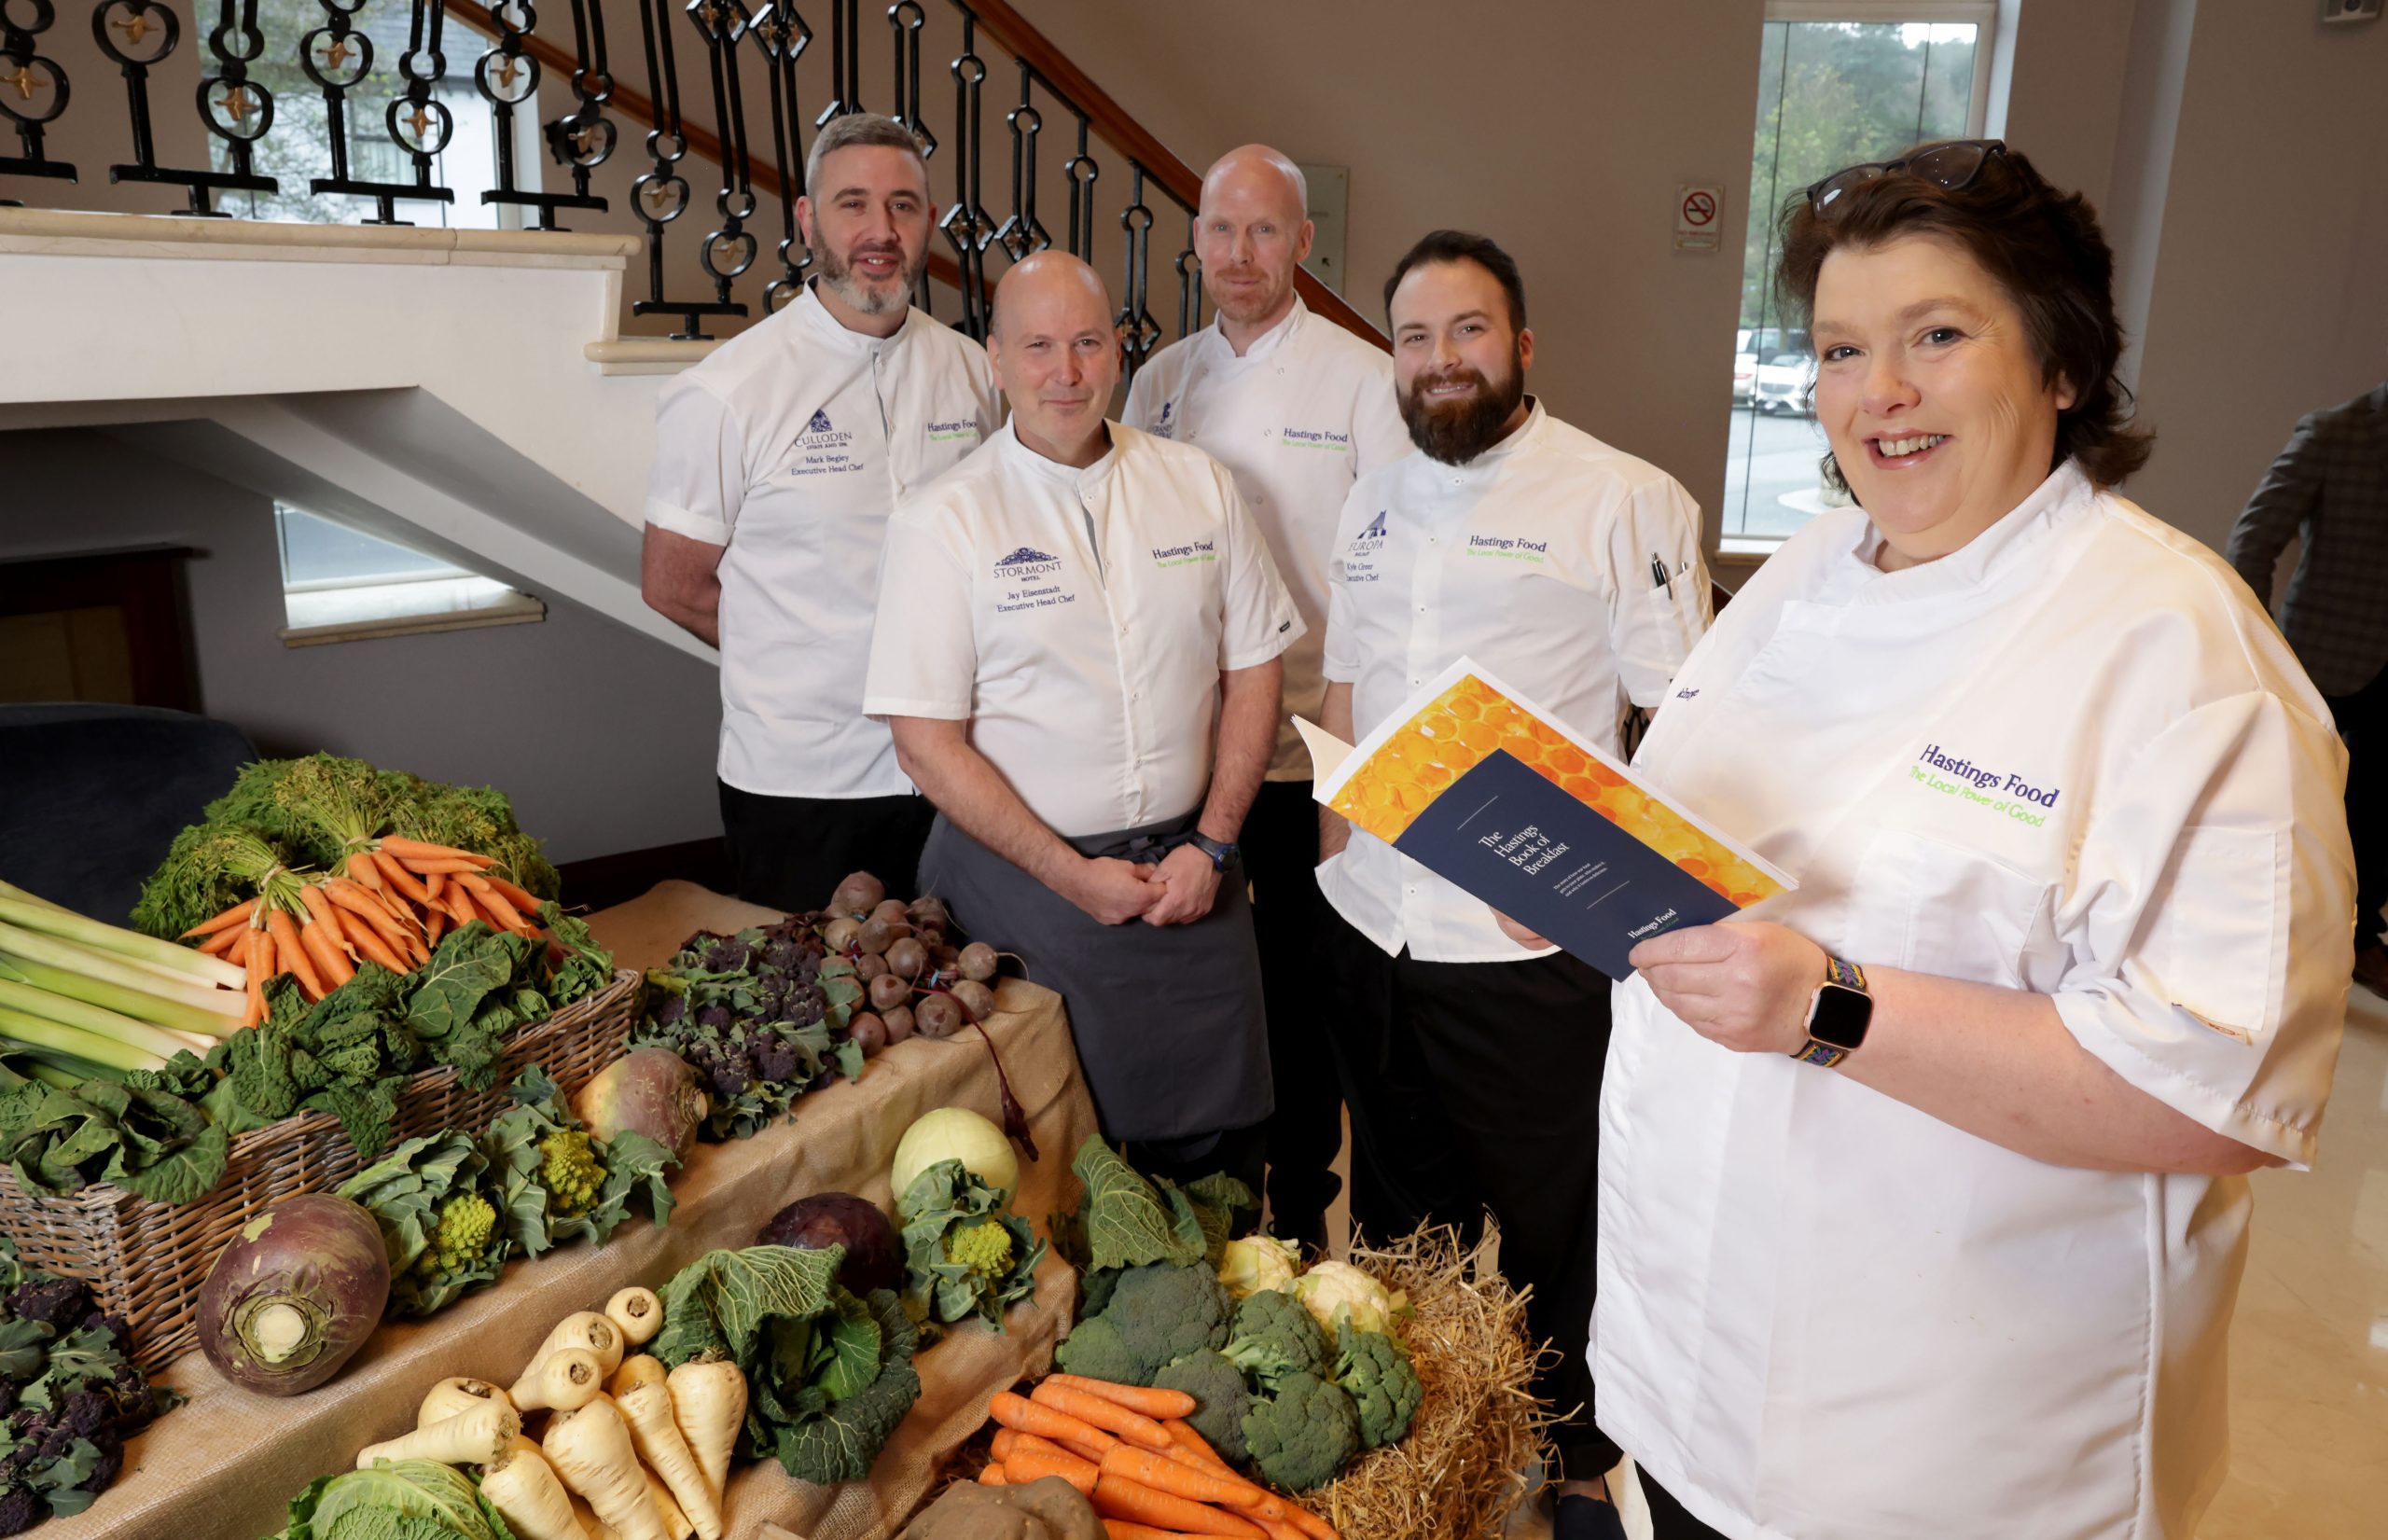 Hastings Hotels celebrates the best of NI suppliers